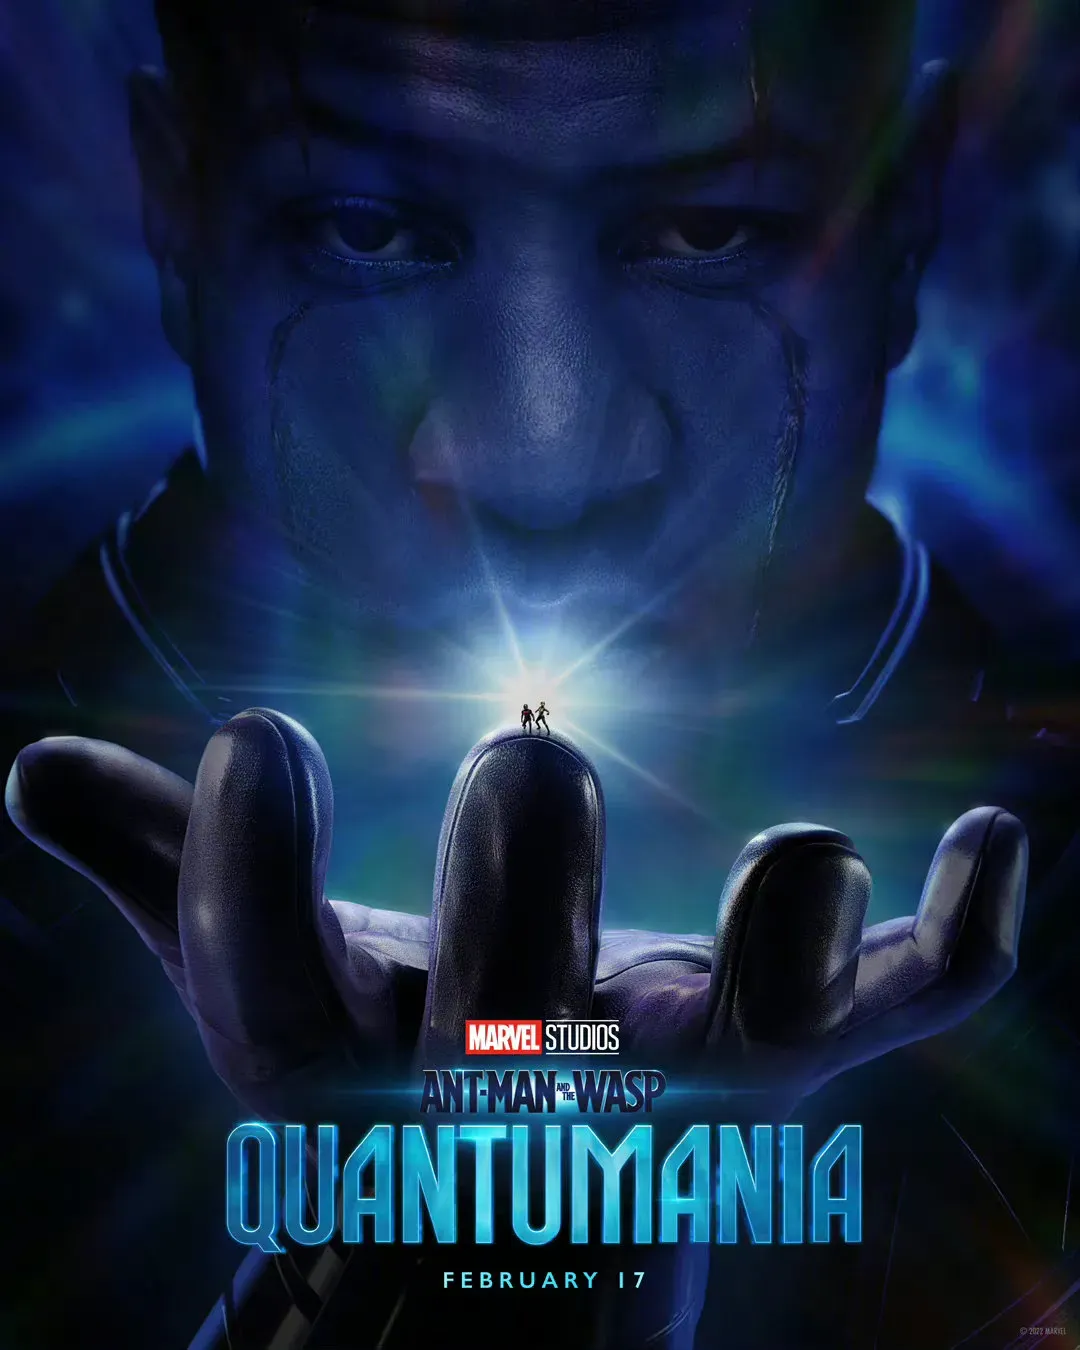 Marvel's new film 'Ant-Man and the Wasp: Quantumania' officially released the first trailer and poster | FMV6